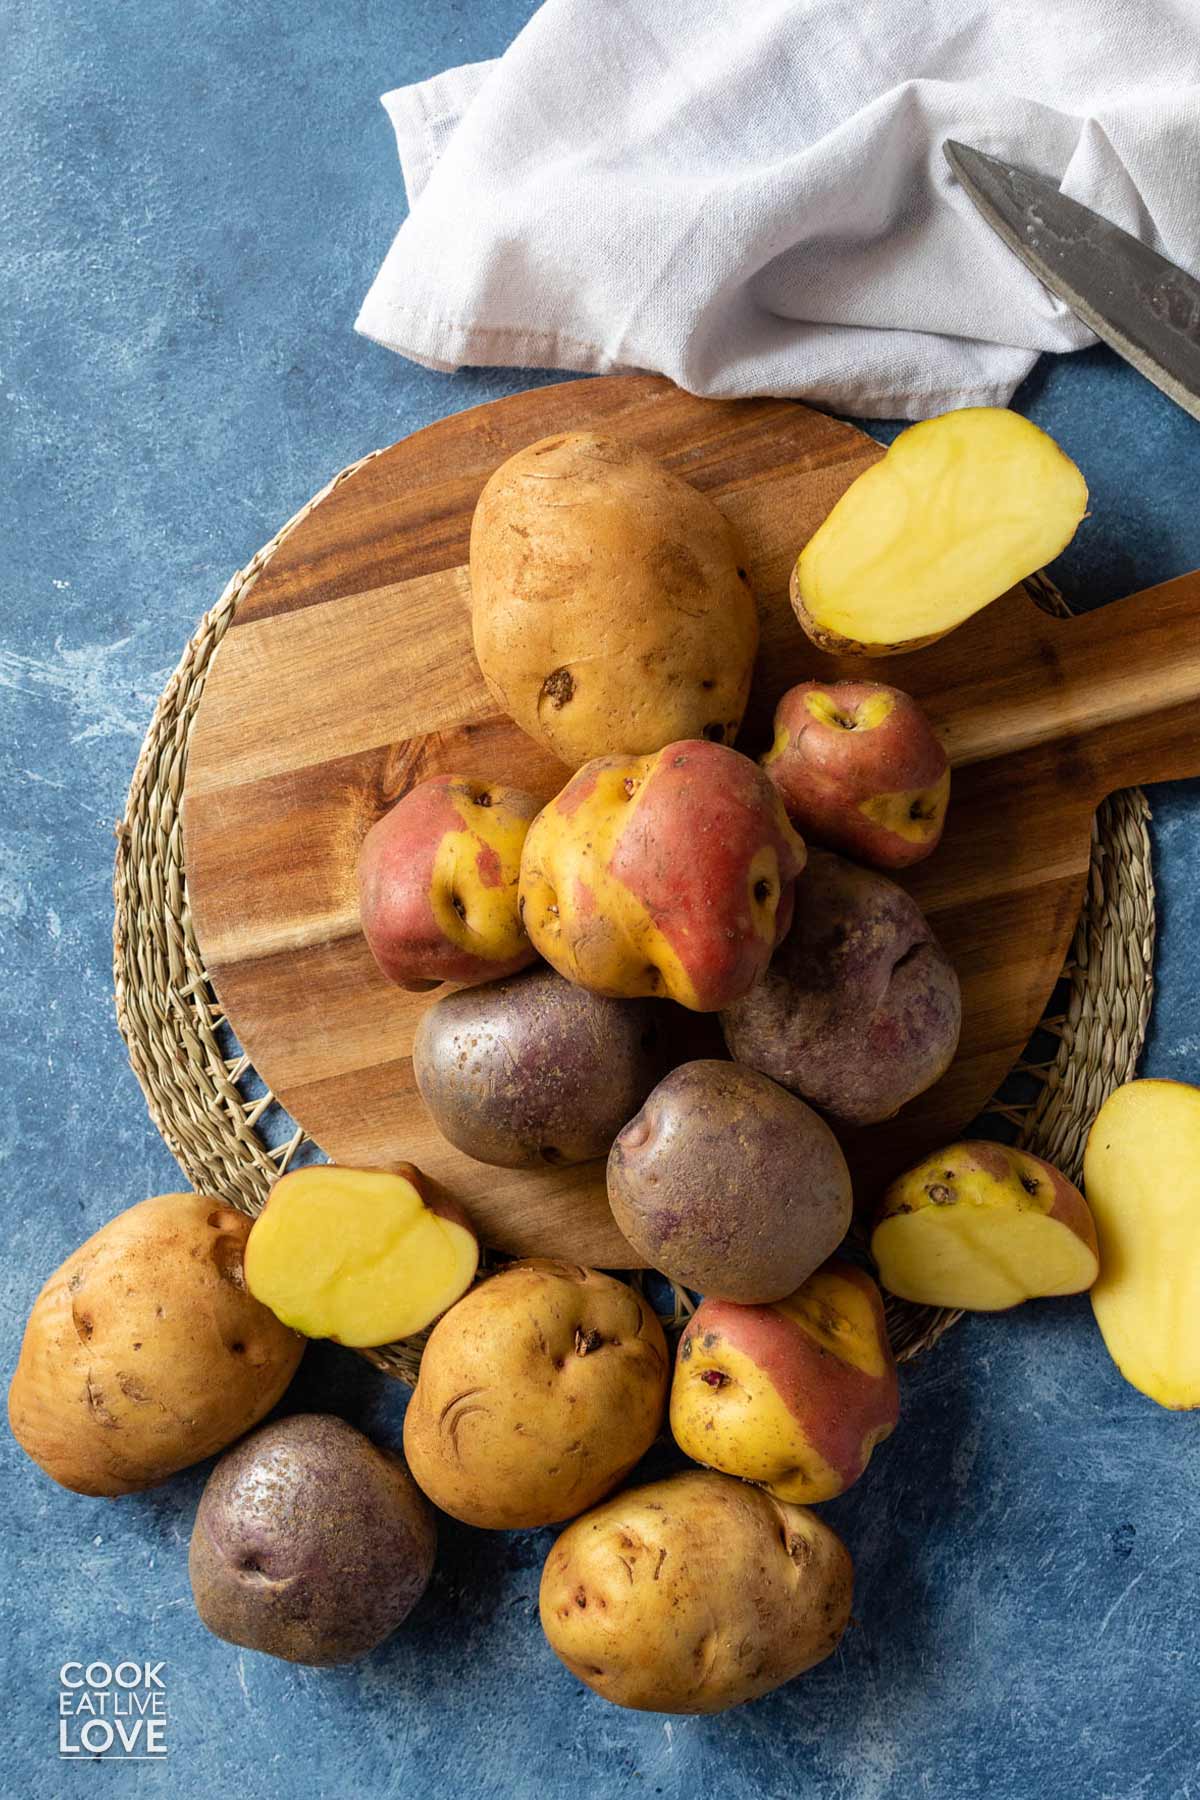 Potatoes on the table to use to cut for fries.